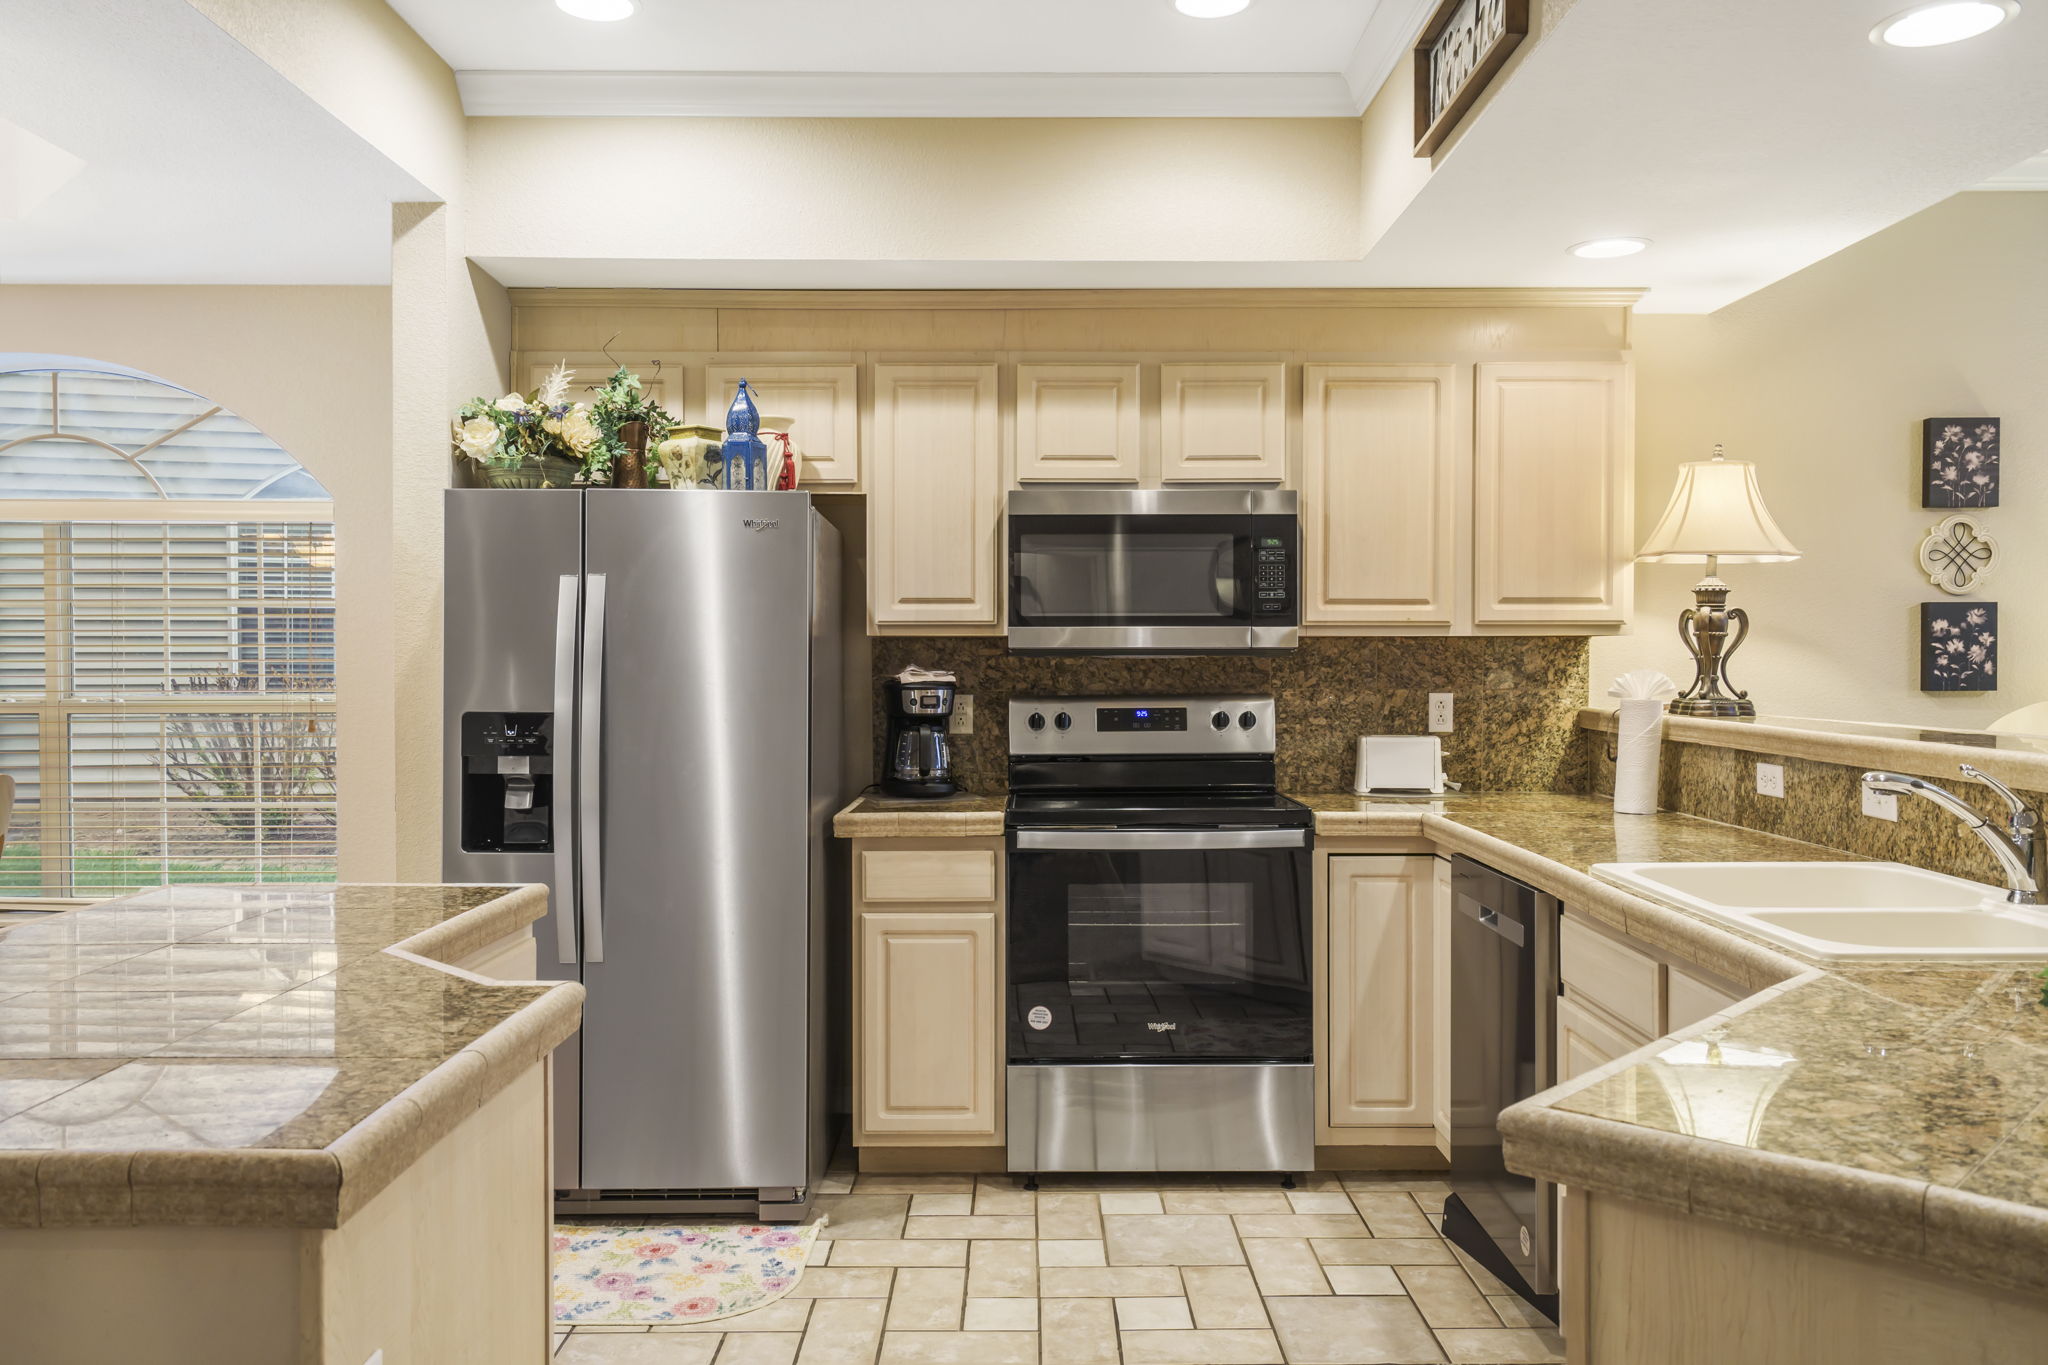 Full Kitchen with Upgraded Appliances